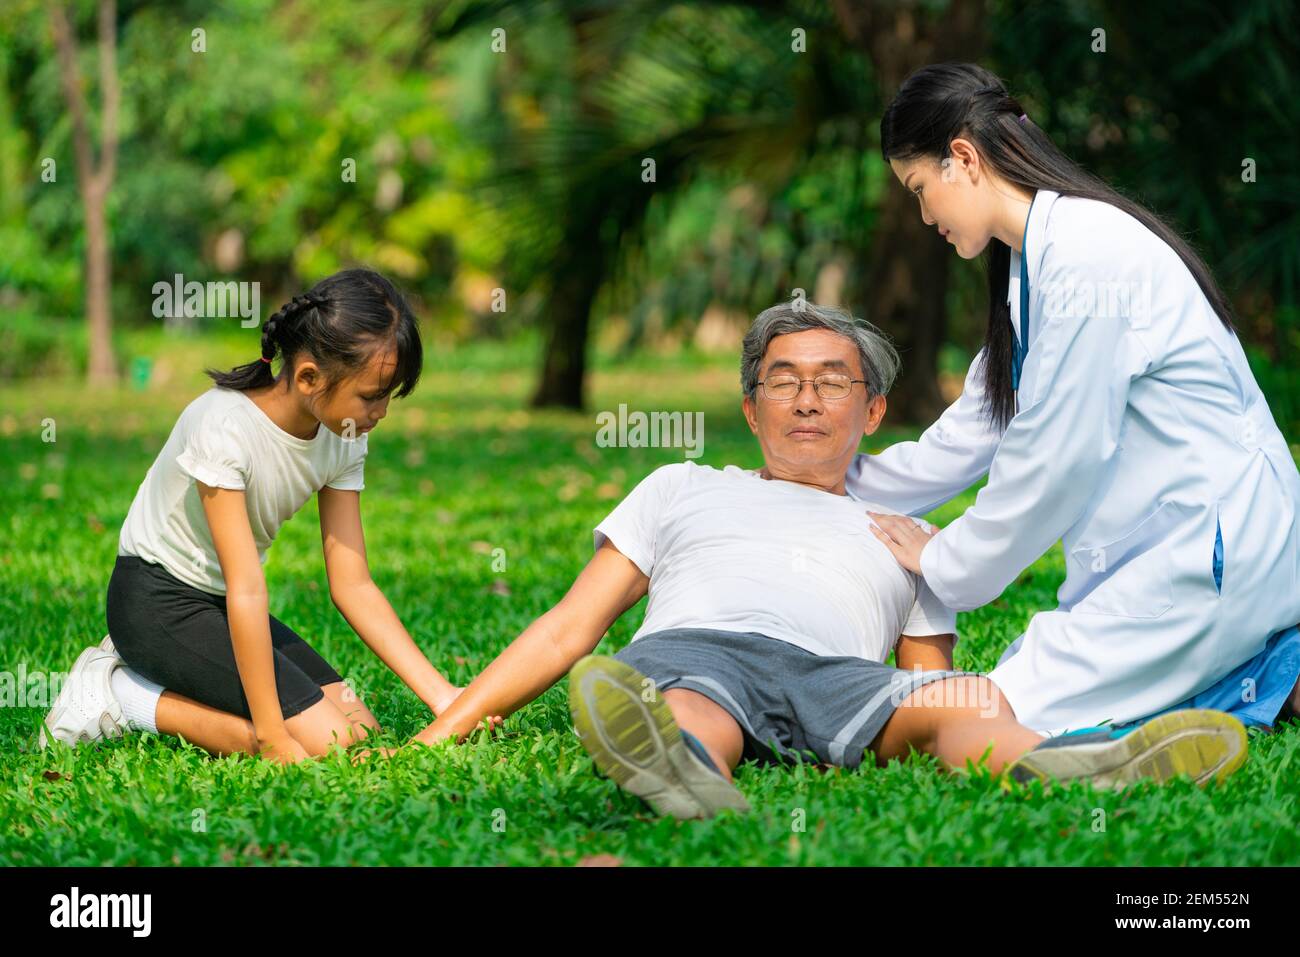 Senior man having chest pain or heart attack in the park. Old people elderly healthcare concept. Stock Photo